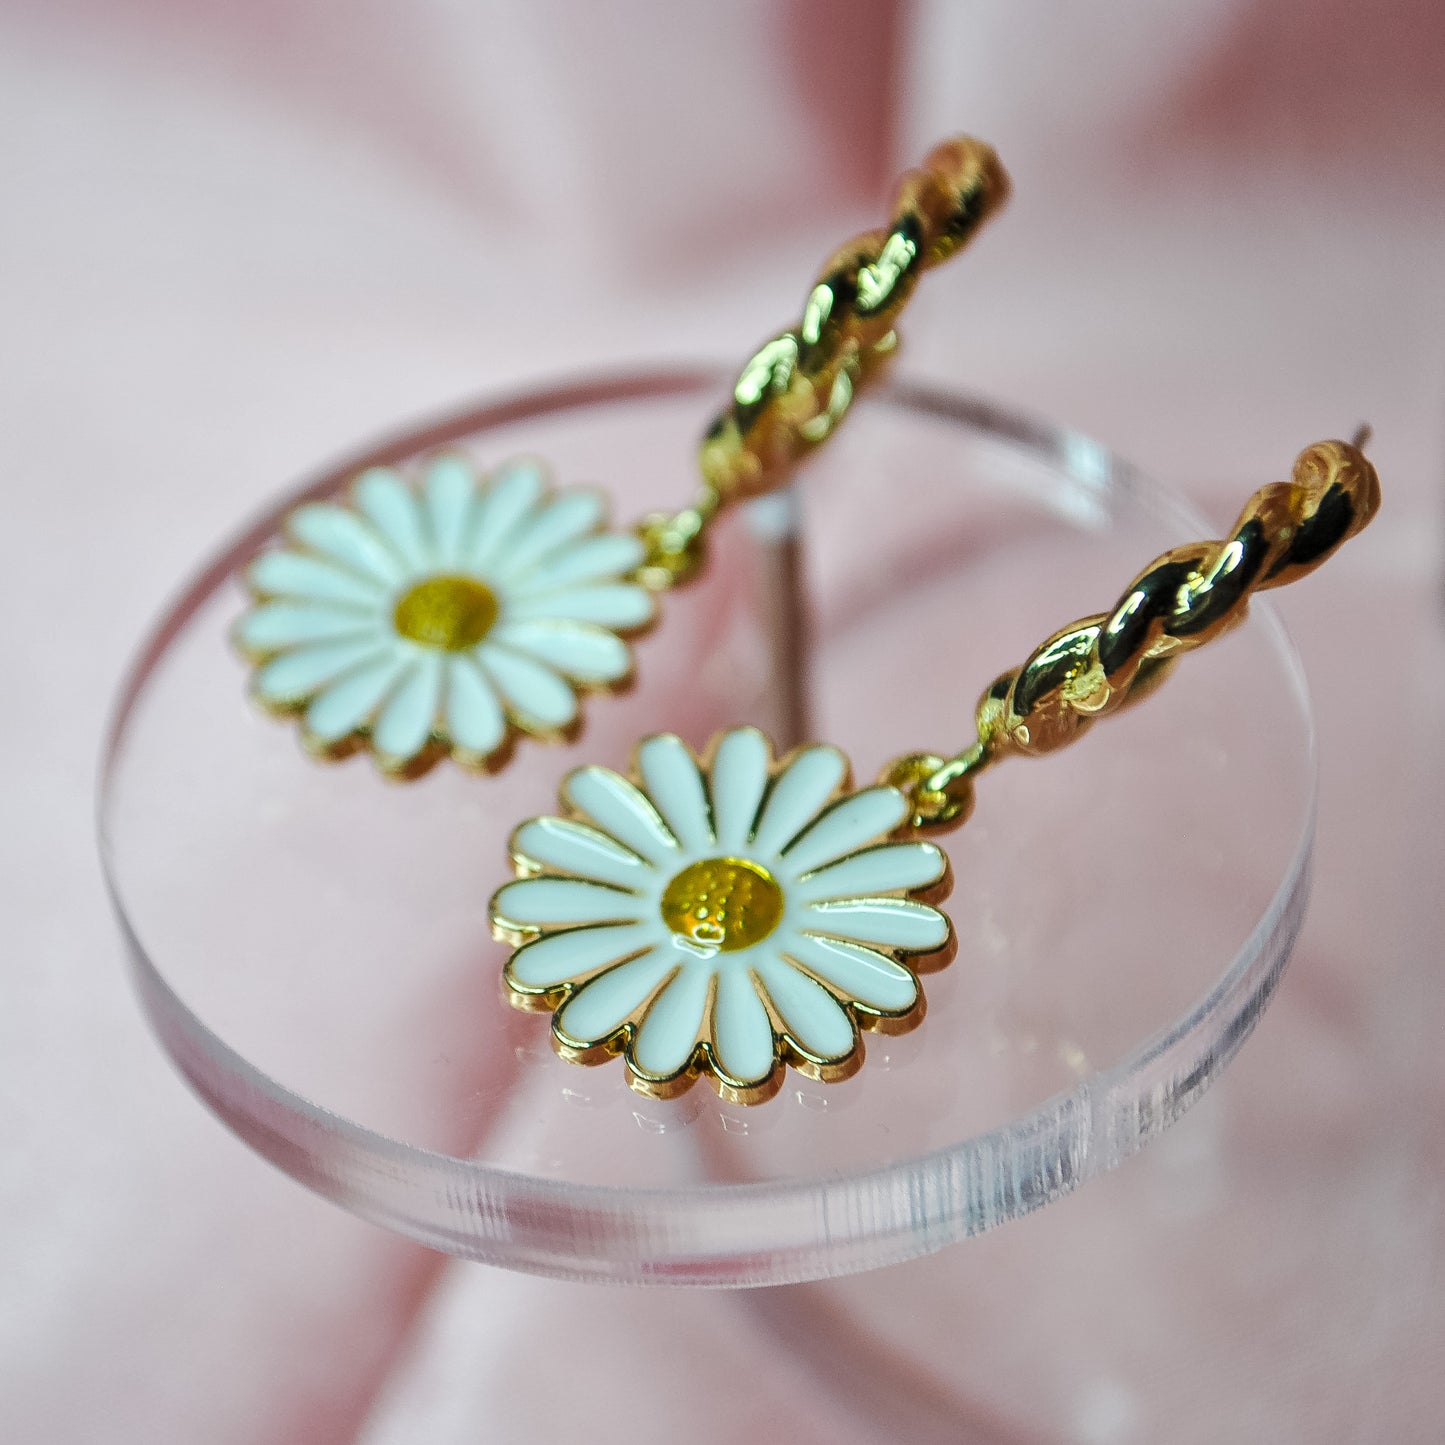 Gold and White Daisy Earrings